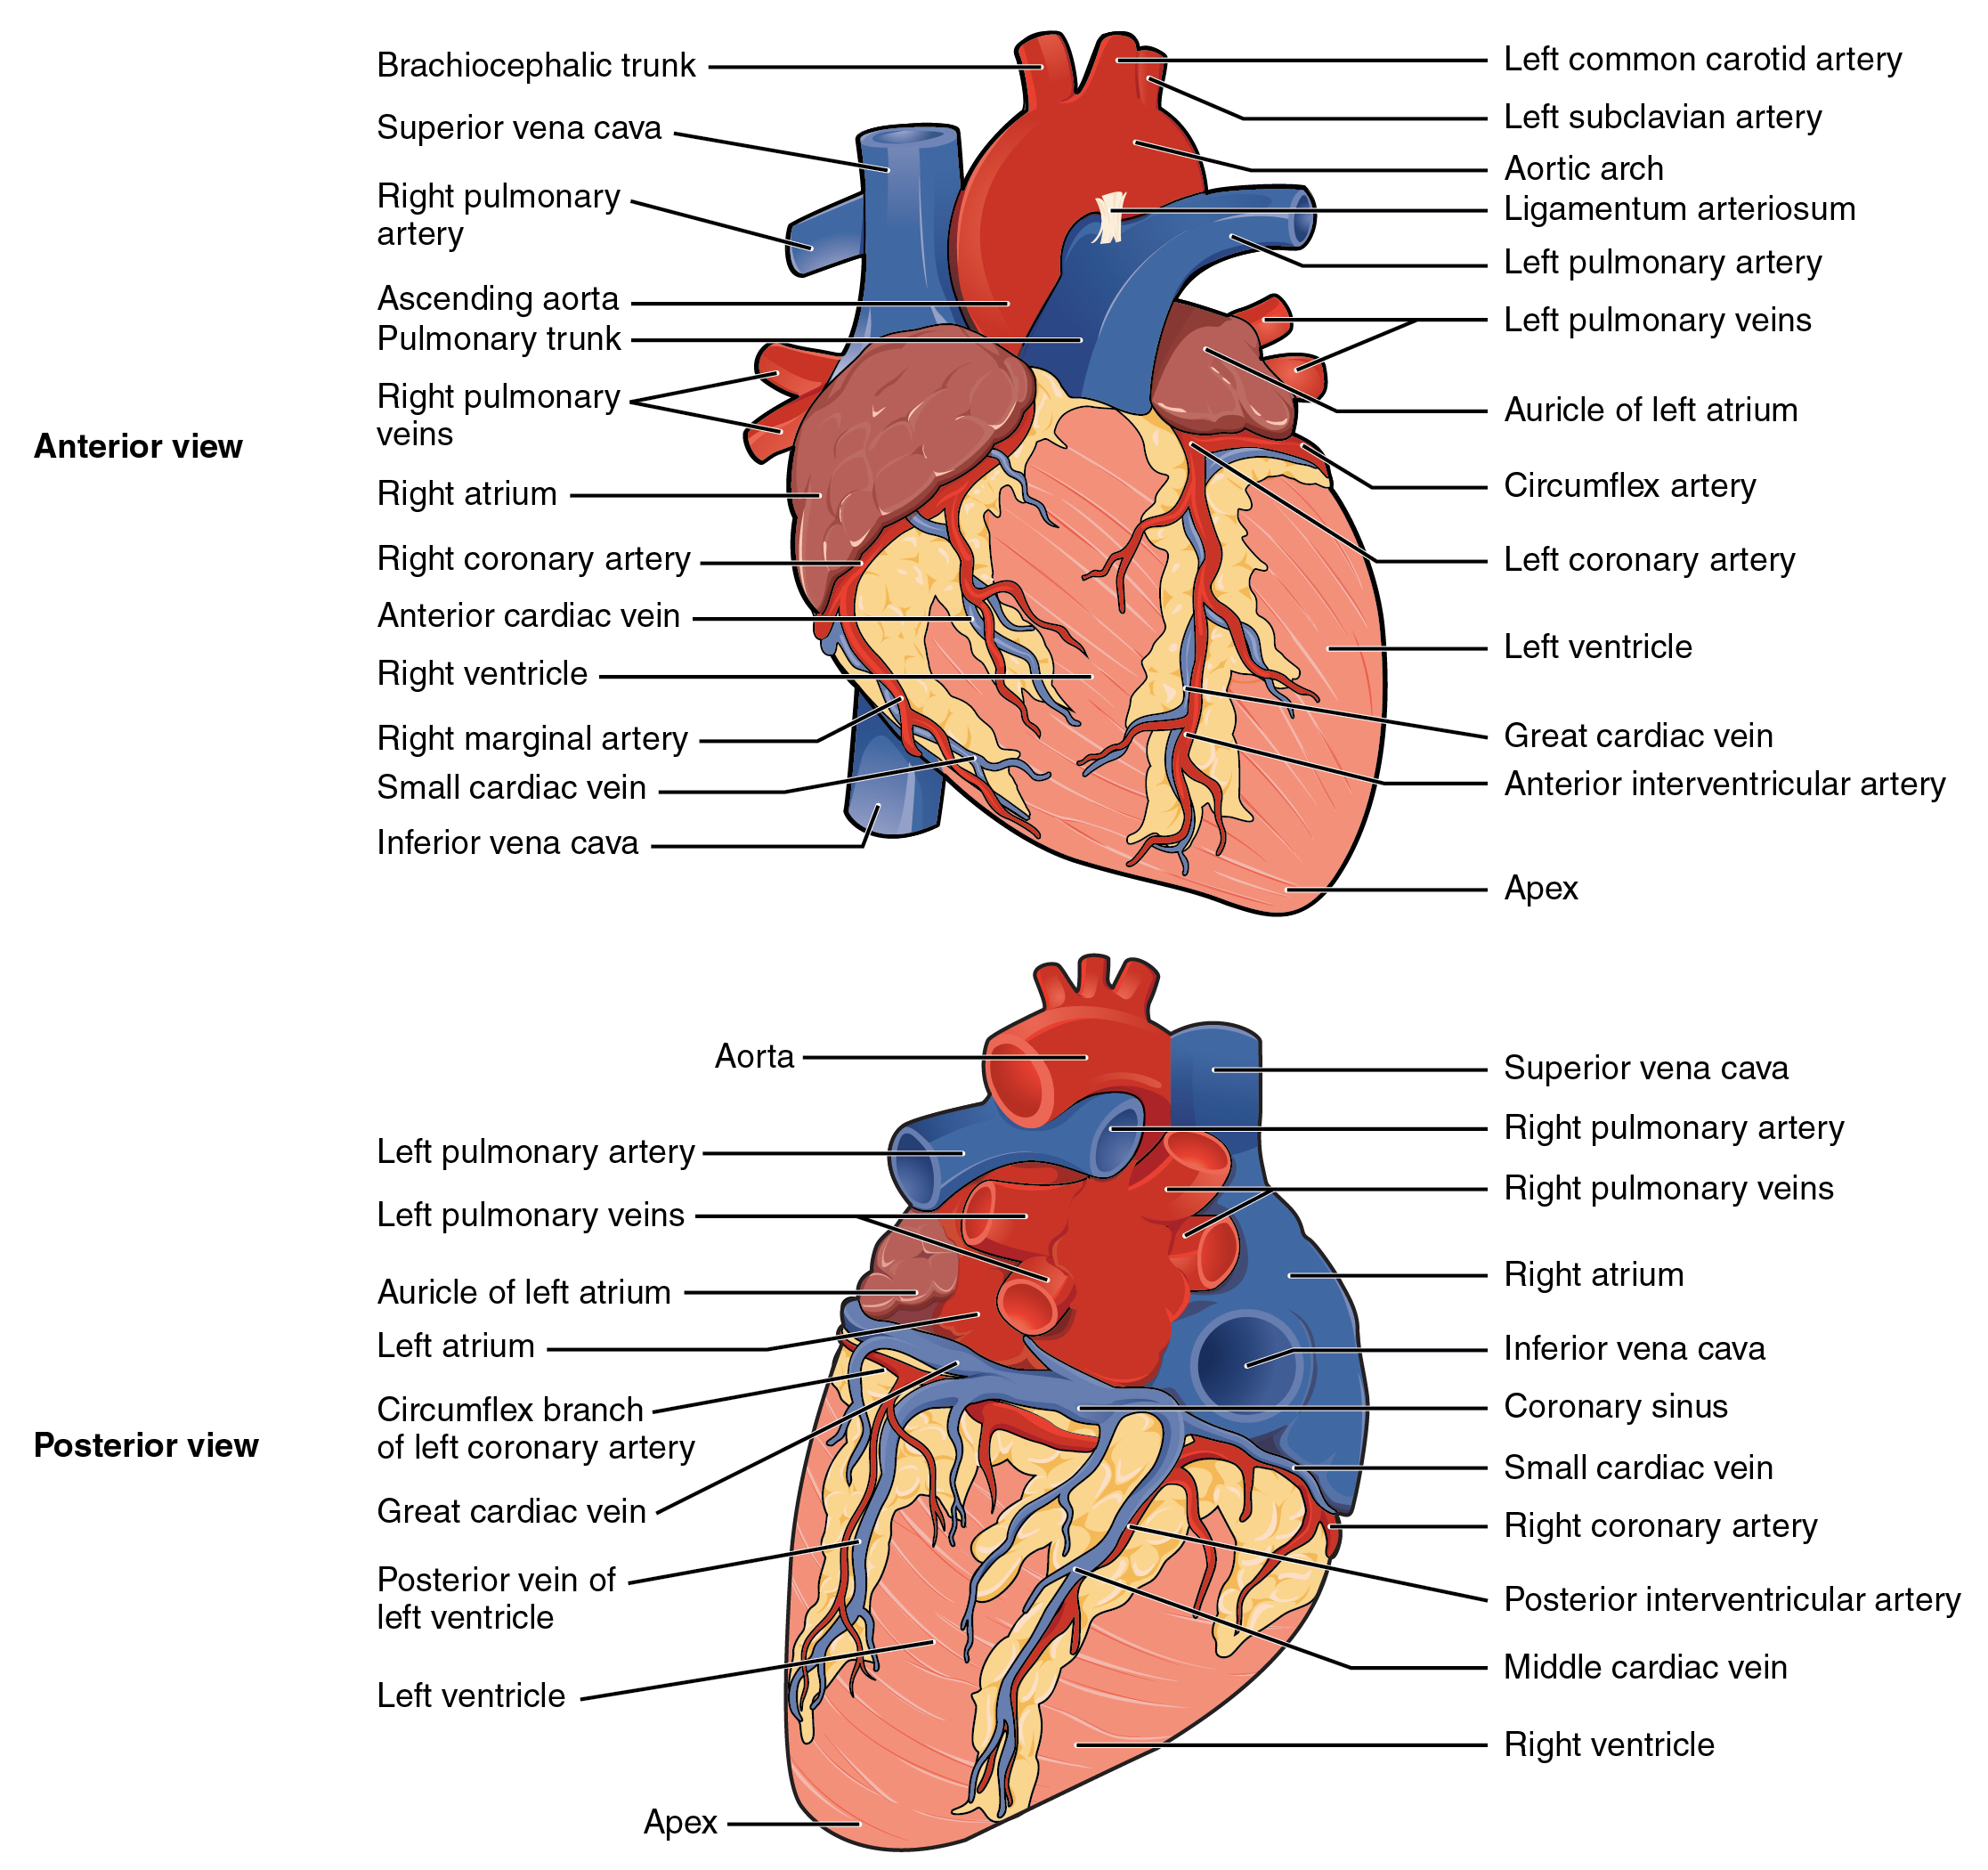 Labeled diagrams of the superficial anatomy of the heart with anterior and posterior views.